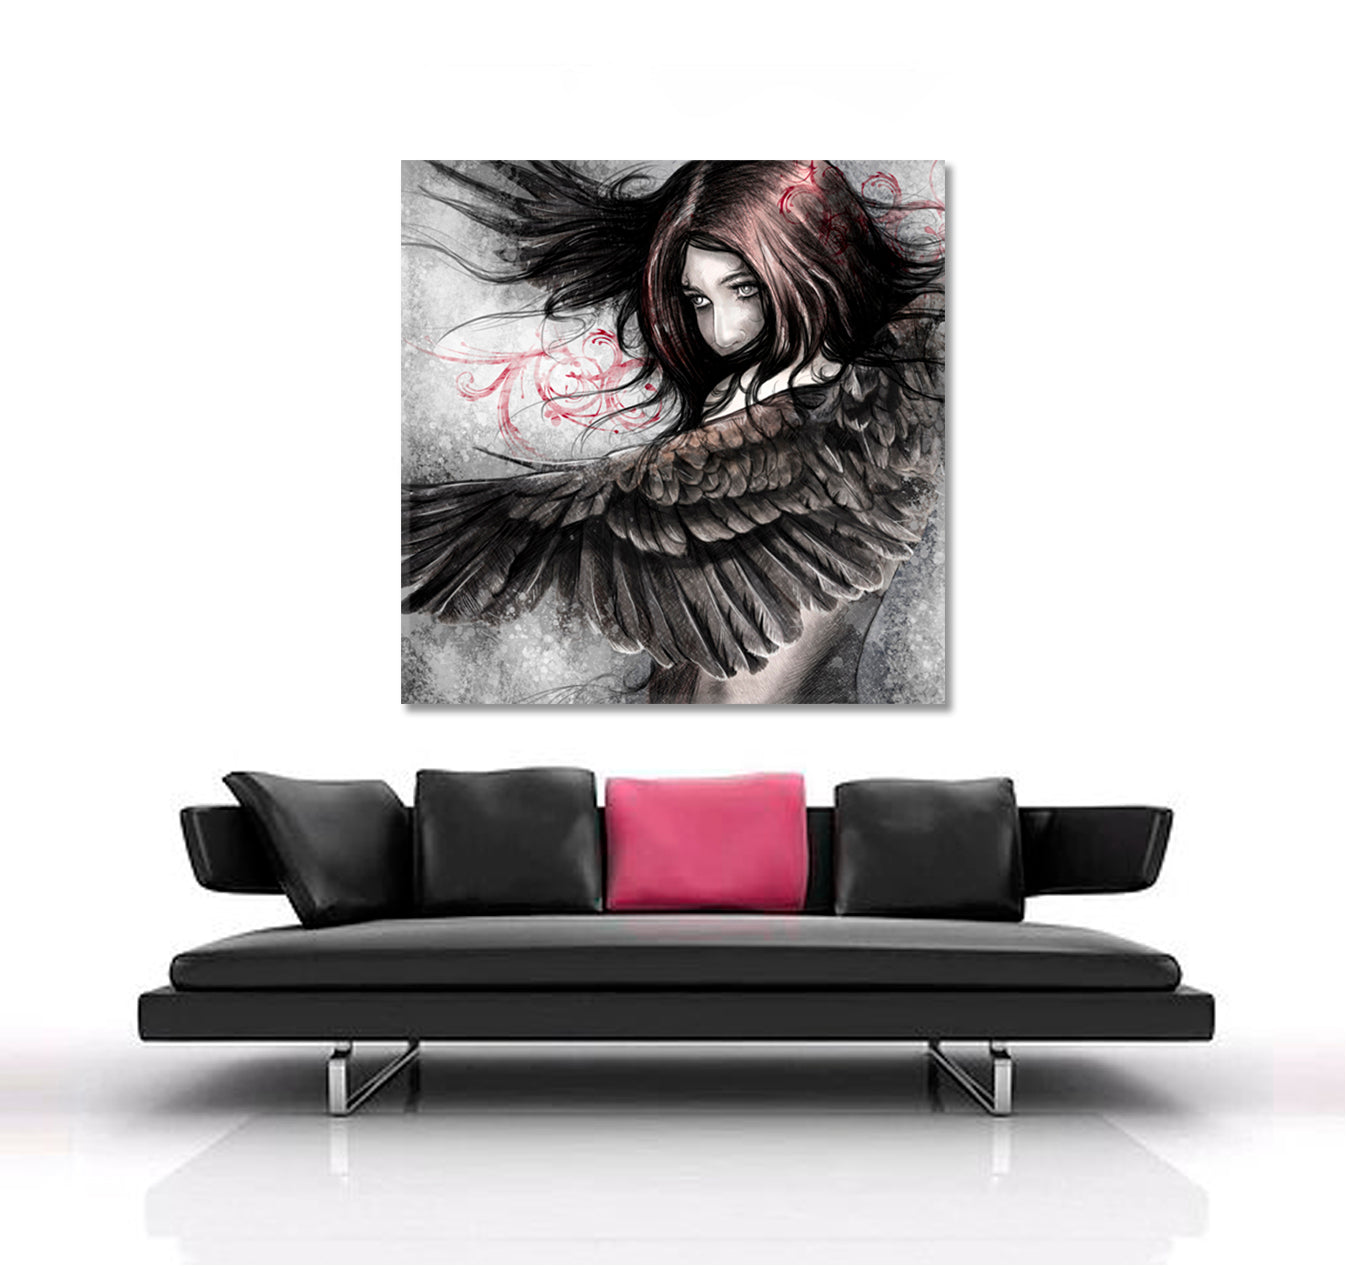 CHASING A DREAM  Beautiful Girl with Eagle Wings Fantasy Concept  - Square Panel Abstract Art Print Artesty   